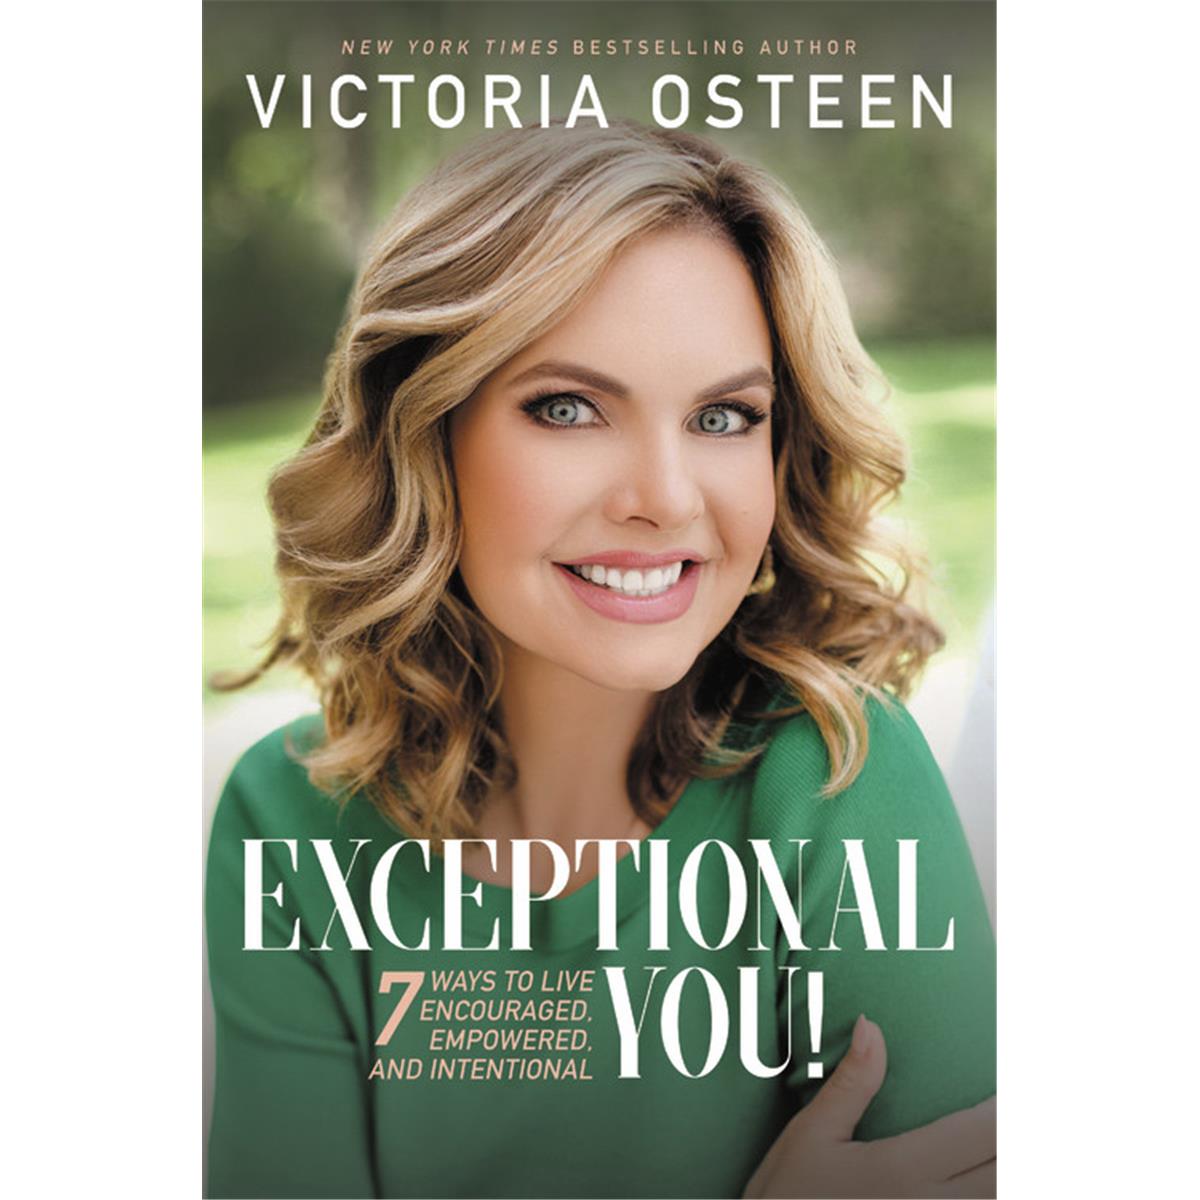 Faithwords & Hachette Book Group 167686 Exceptional You Softcover - Mar 2020